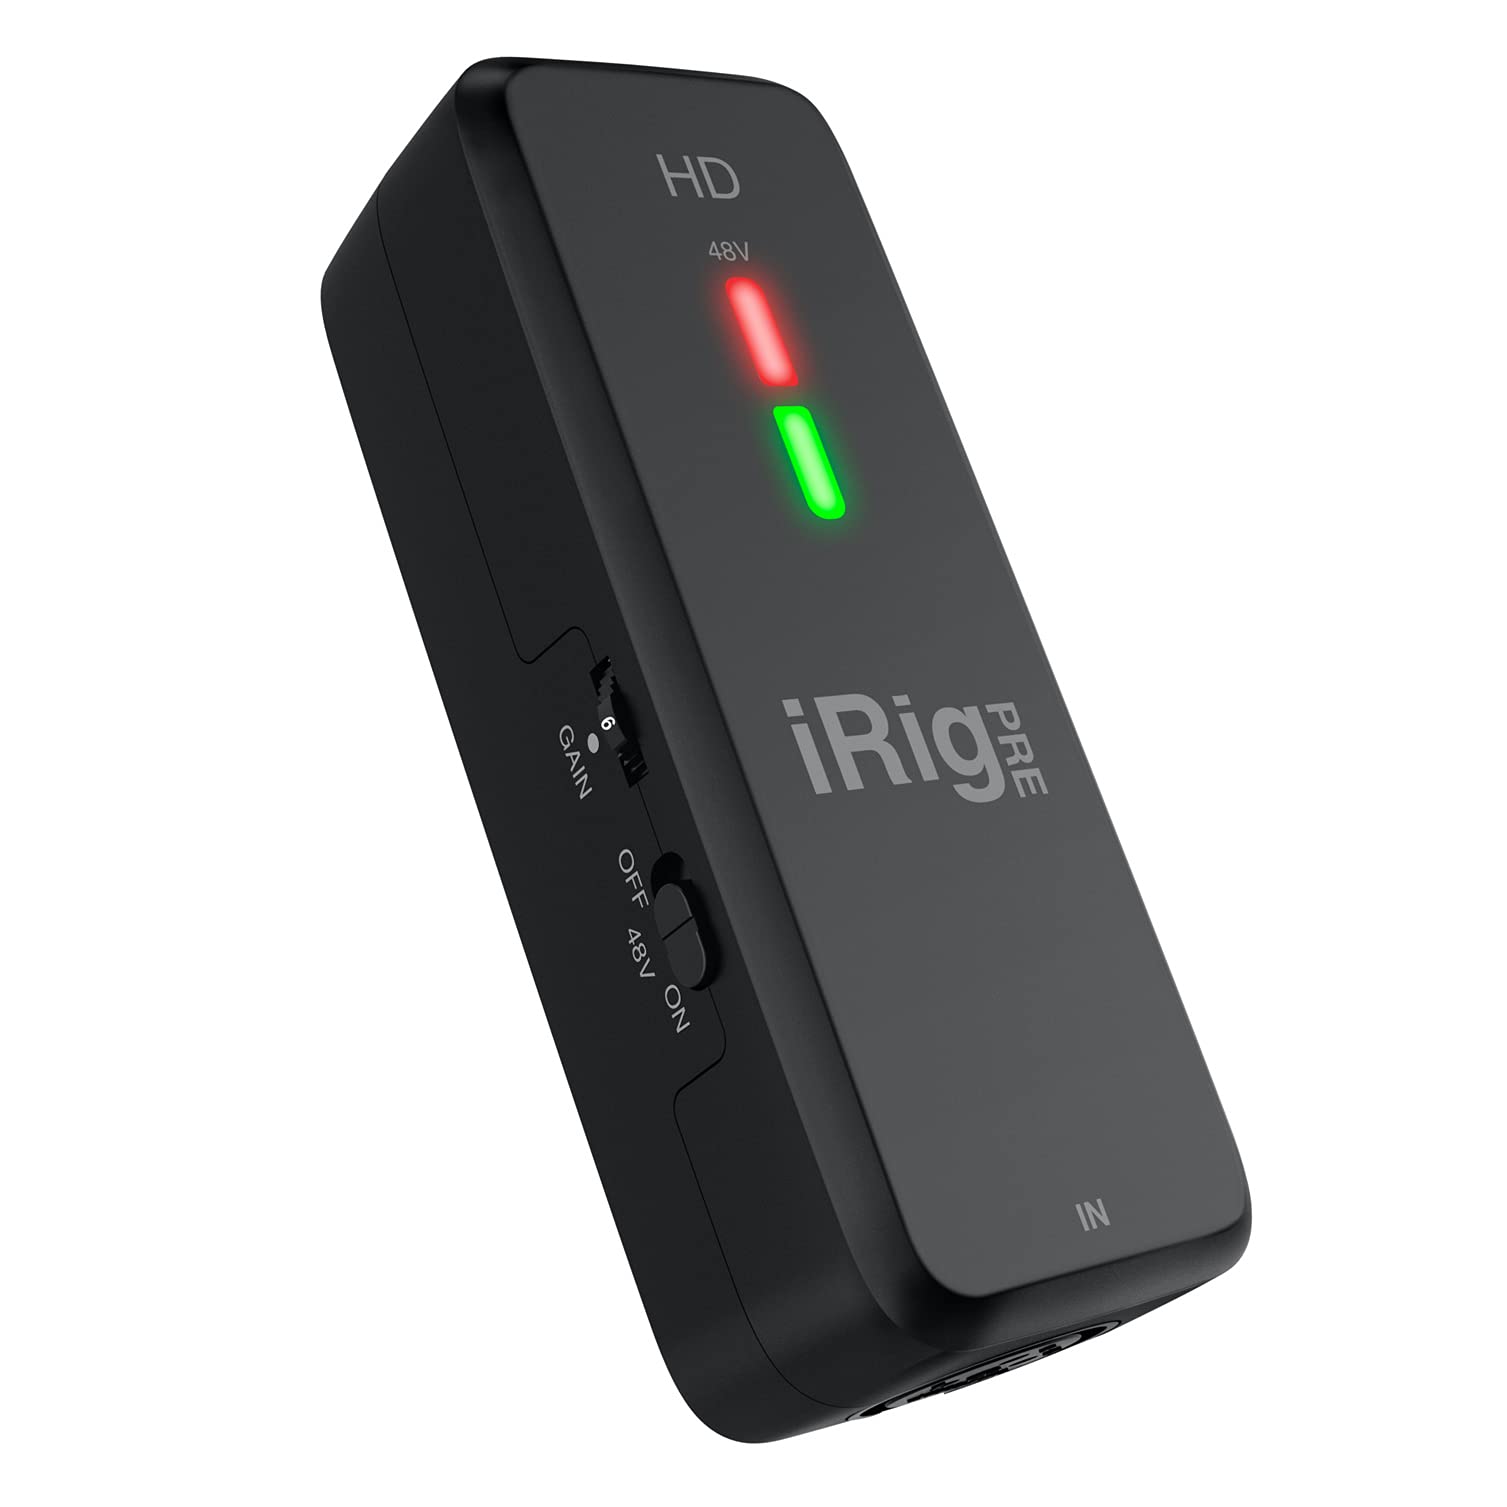 iRig Pre HD - Digital, high definition microphone interface with studio quality preamp